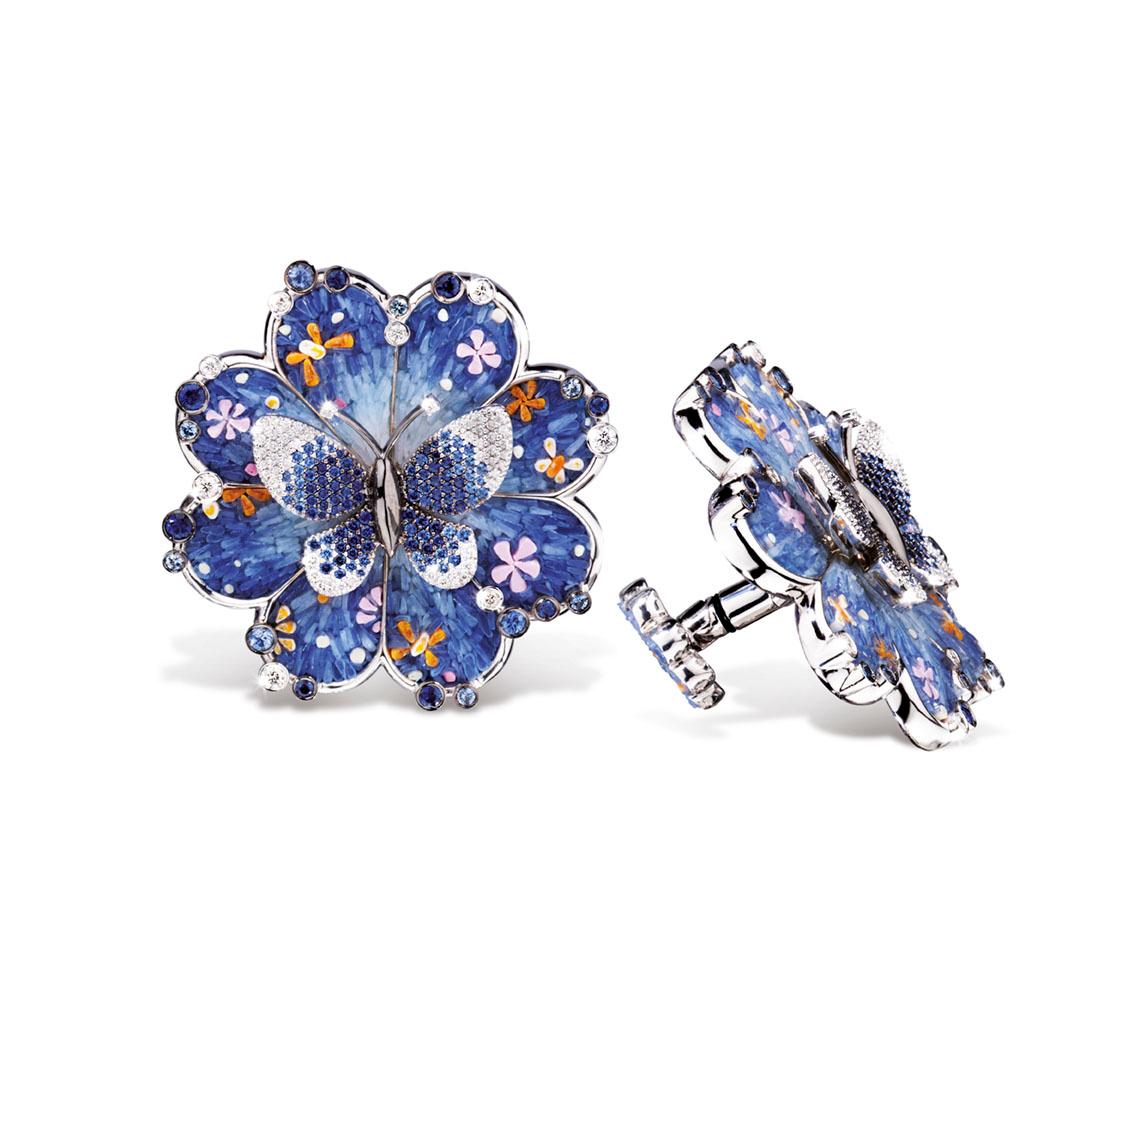 Brilliant Cut Cuffliks White Gold White Diamonds Sapphires Hand Decorated with Micro Mosaic For Sale